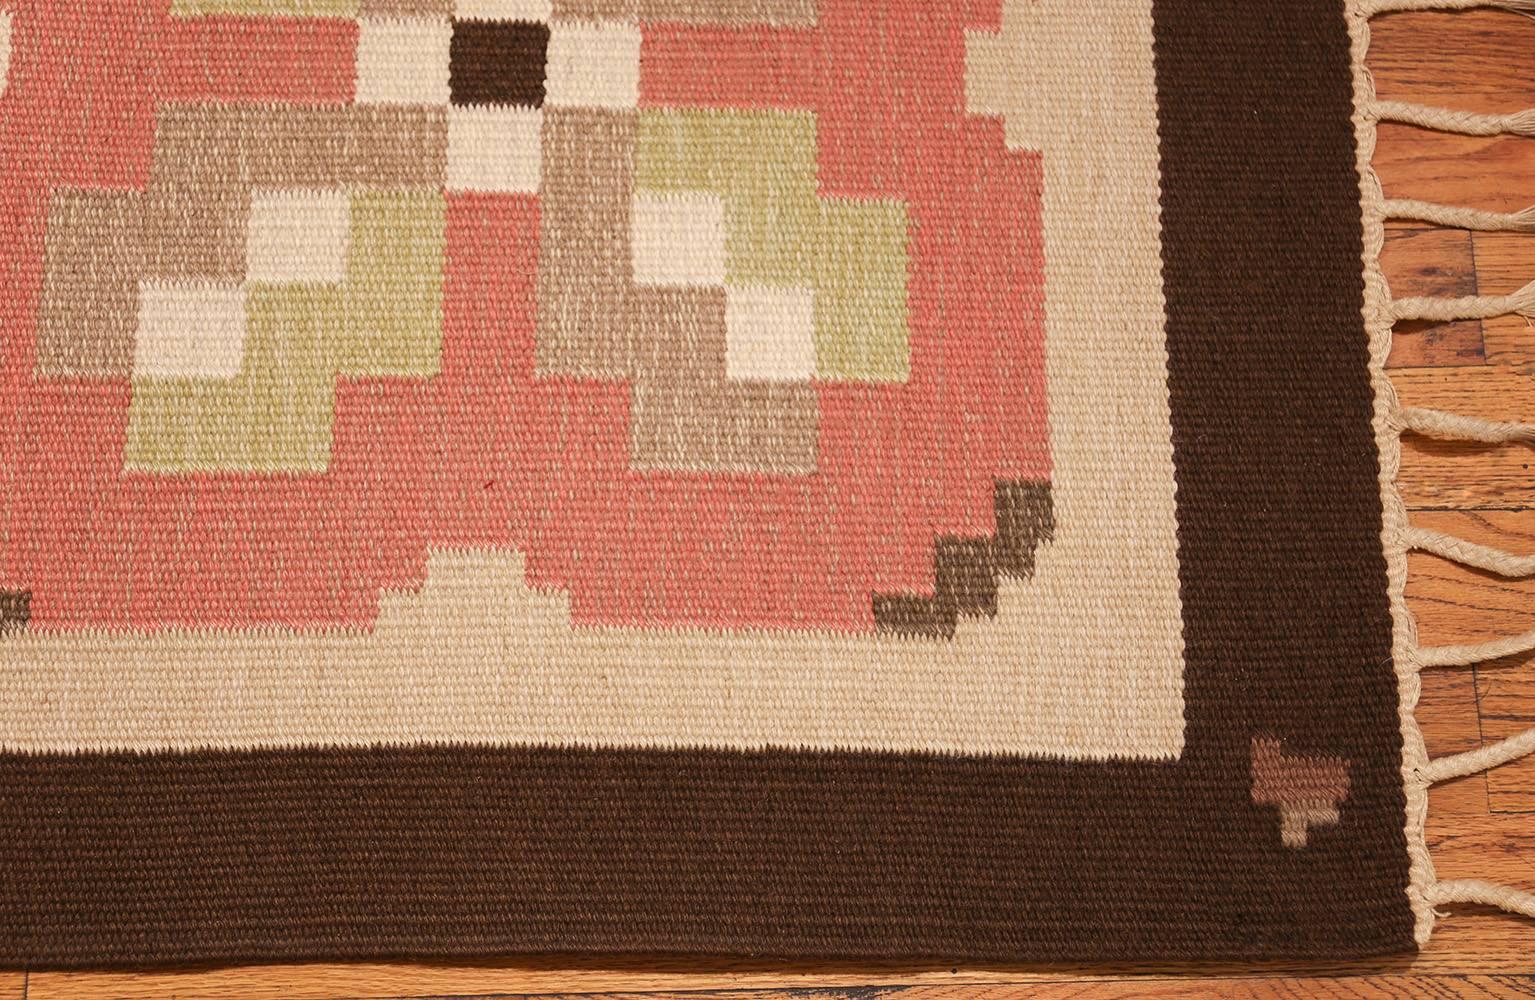 20th Century Vintage Swedish Kilim. Size: 9 ft 9 in x 13 ft 4 in (2.97 m x 4.06 m)